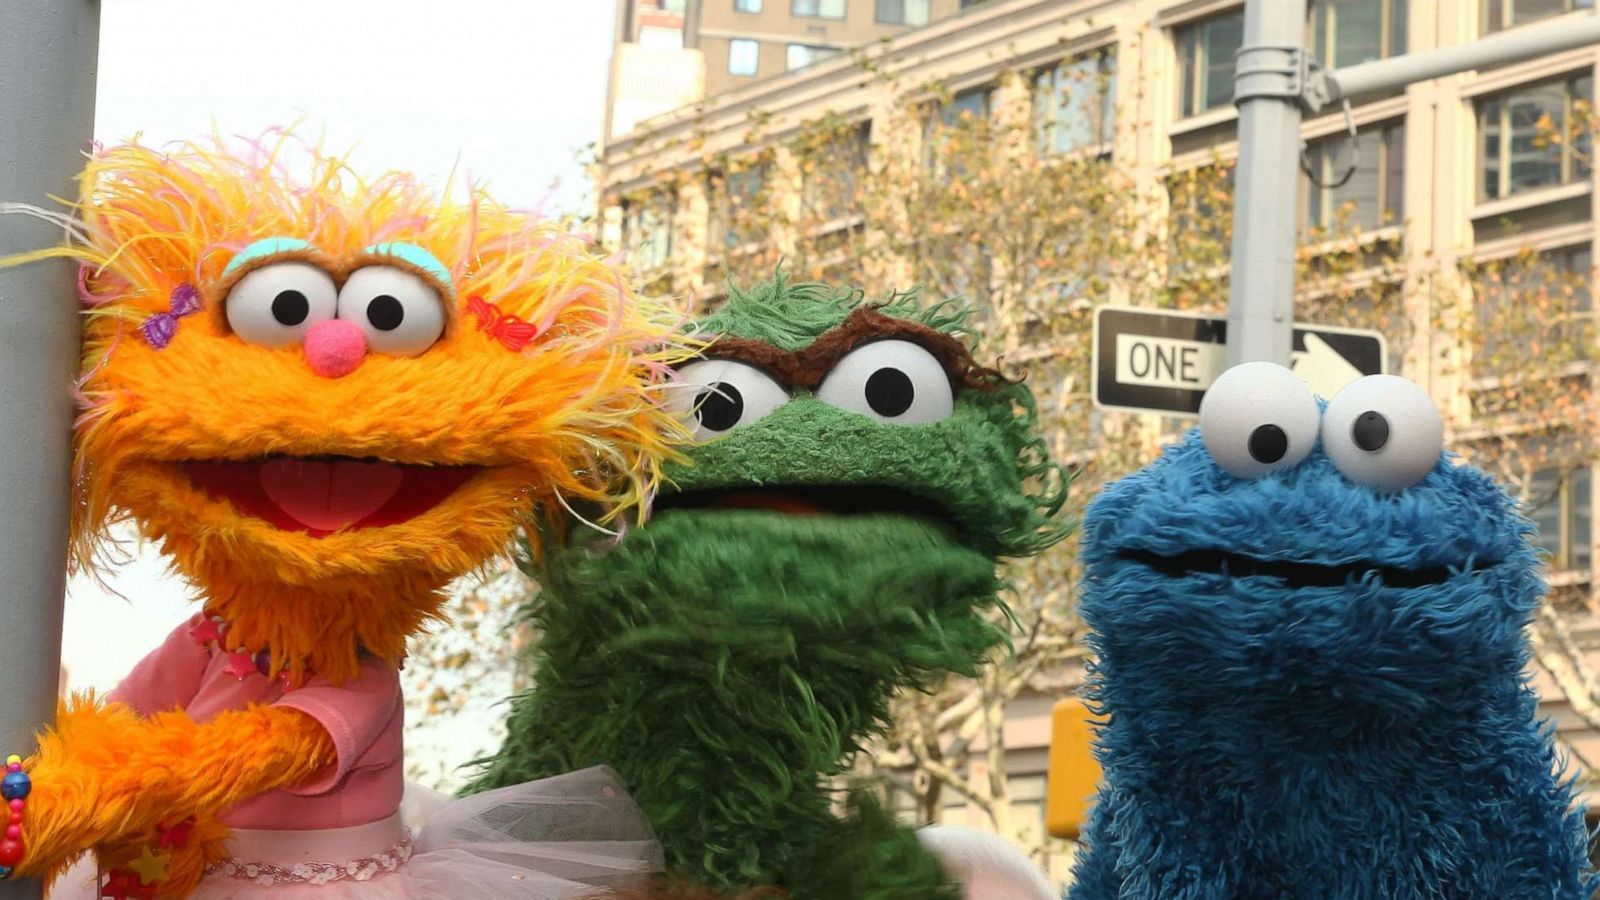 How 'Sesame Street' is helping kids feel connected during the pandemic